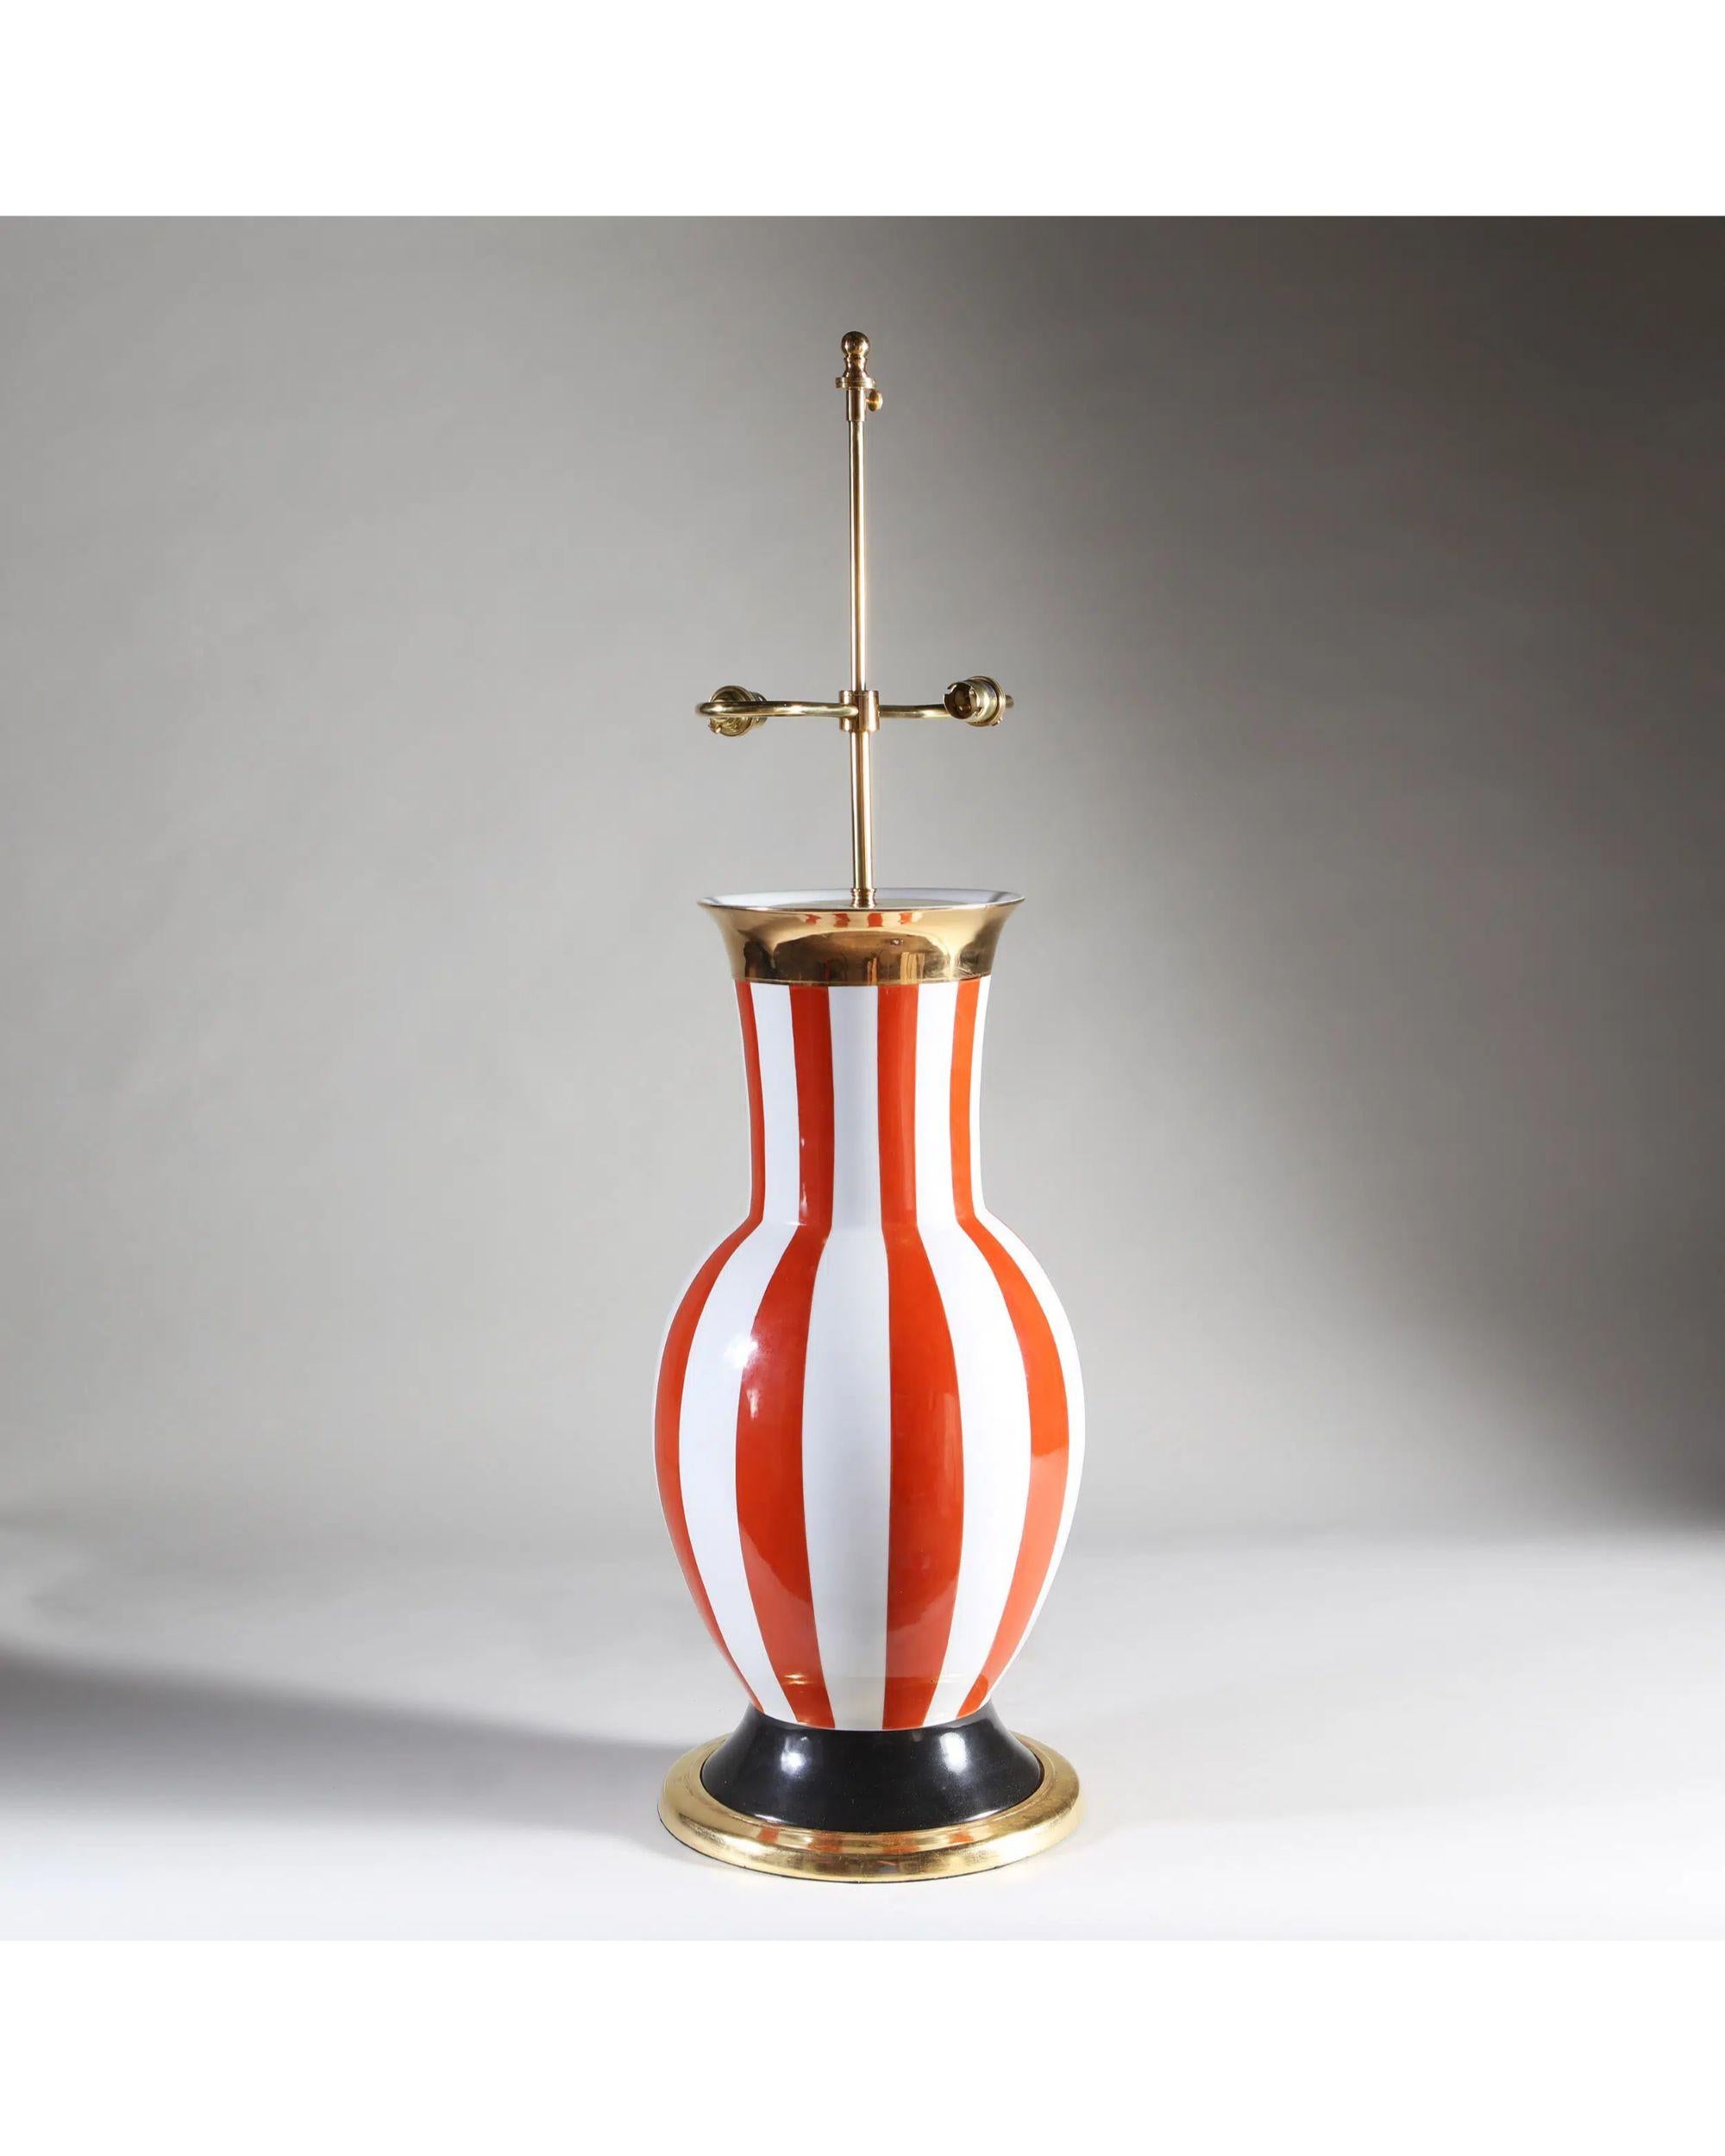 Table lamp by and signed Frédéric de Luca, Paris, 1985

A most unusual large scale porcelain vase decorated with gilt and bold red and white stripes, in a manner reminiscent of Commedia del Arte Arlequino.

Additional information:
Origins: